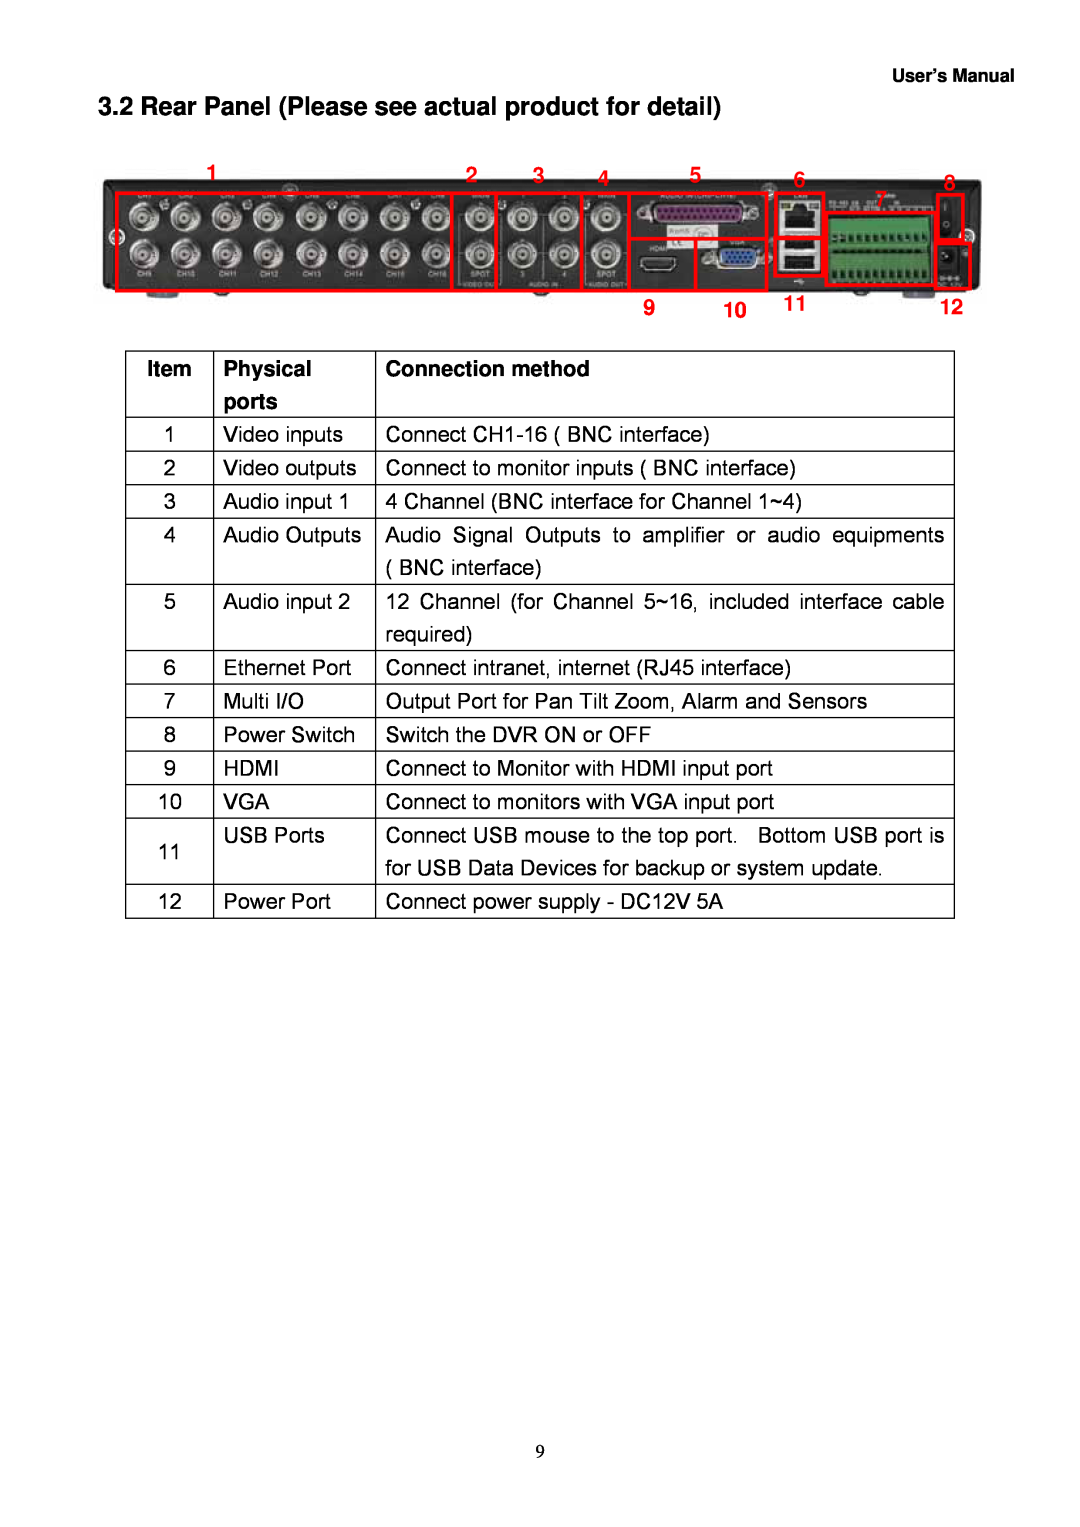 Night Owl Optics Digital Video Recorder manual Rear Panel Please see actual product for detail, Physical, Connection method 